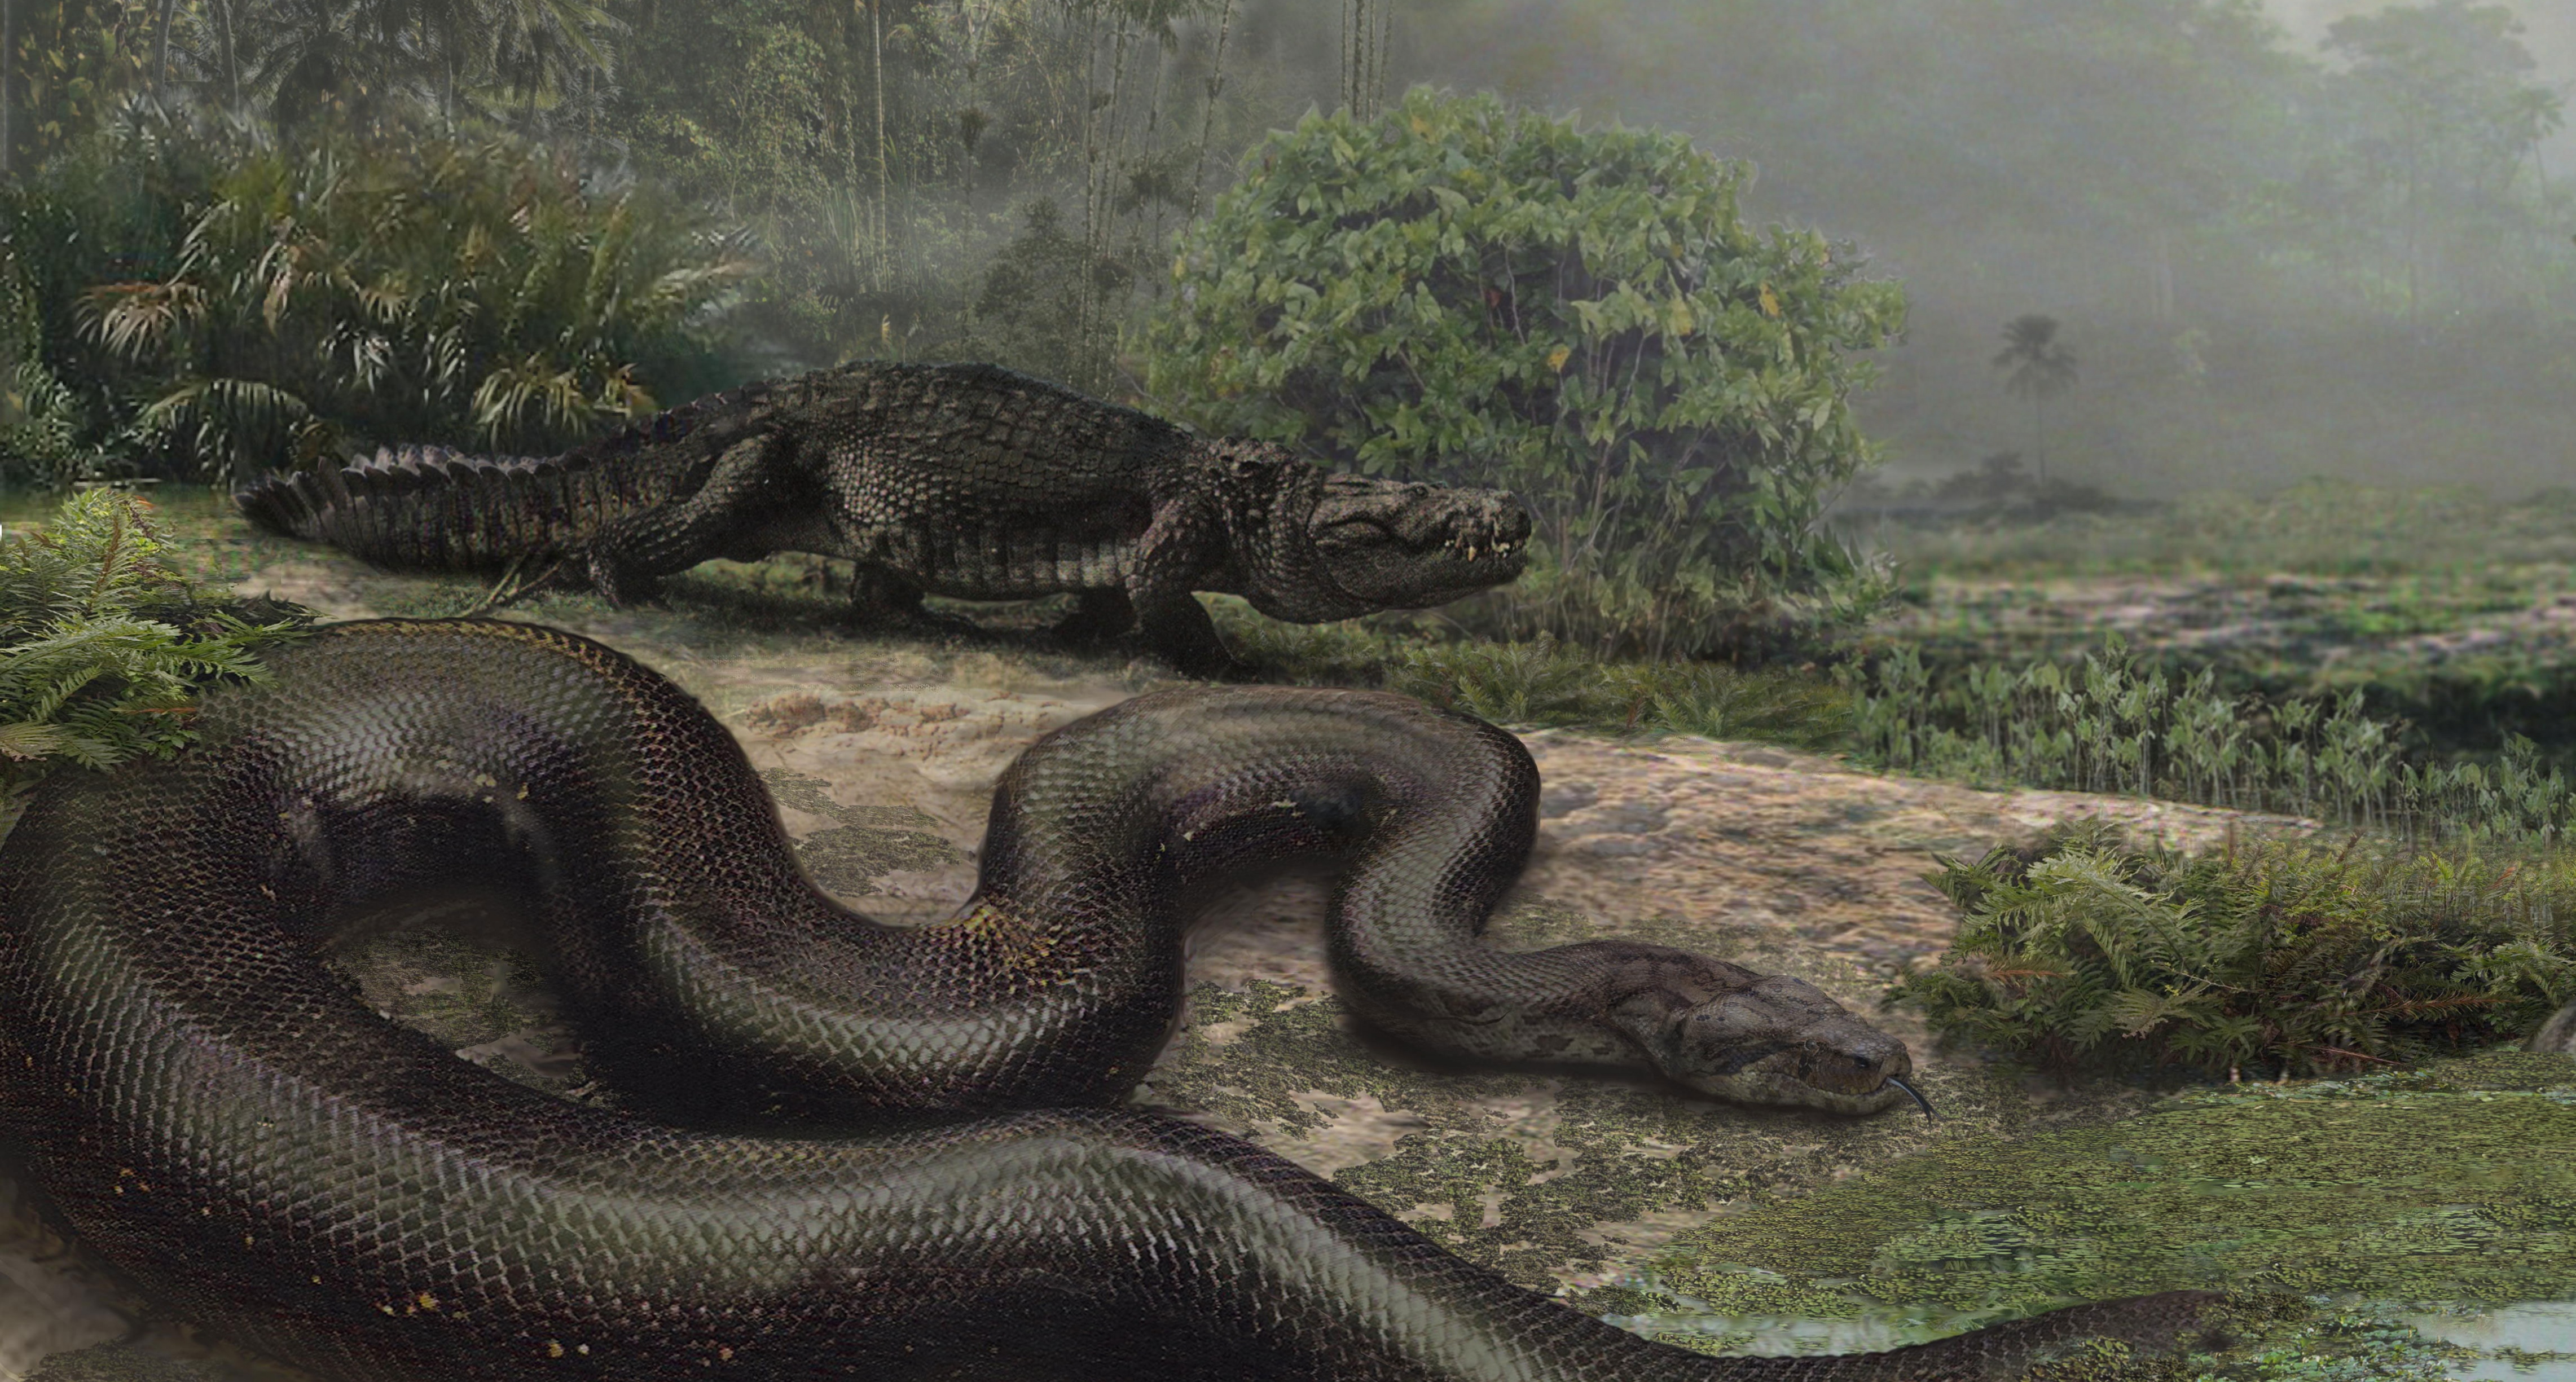 8 Largest Living Snakes In The World 